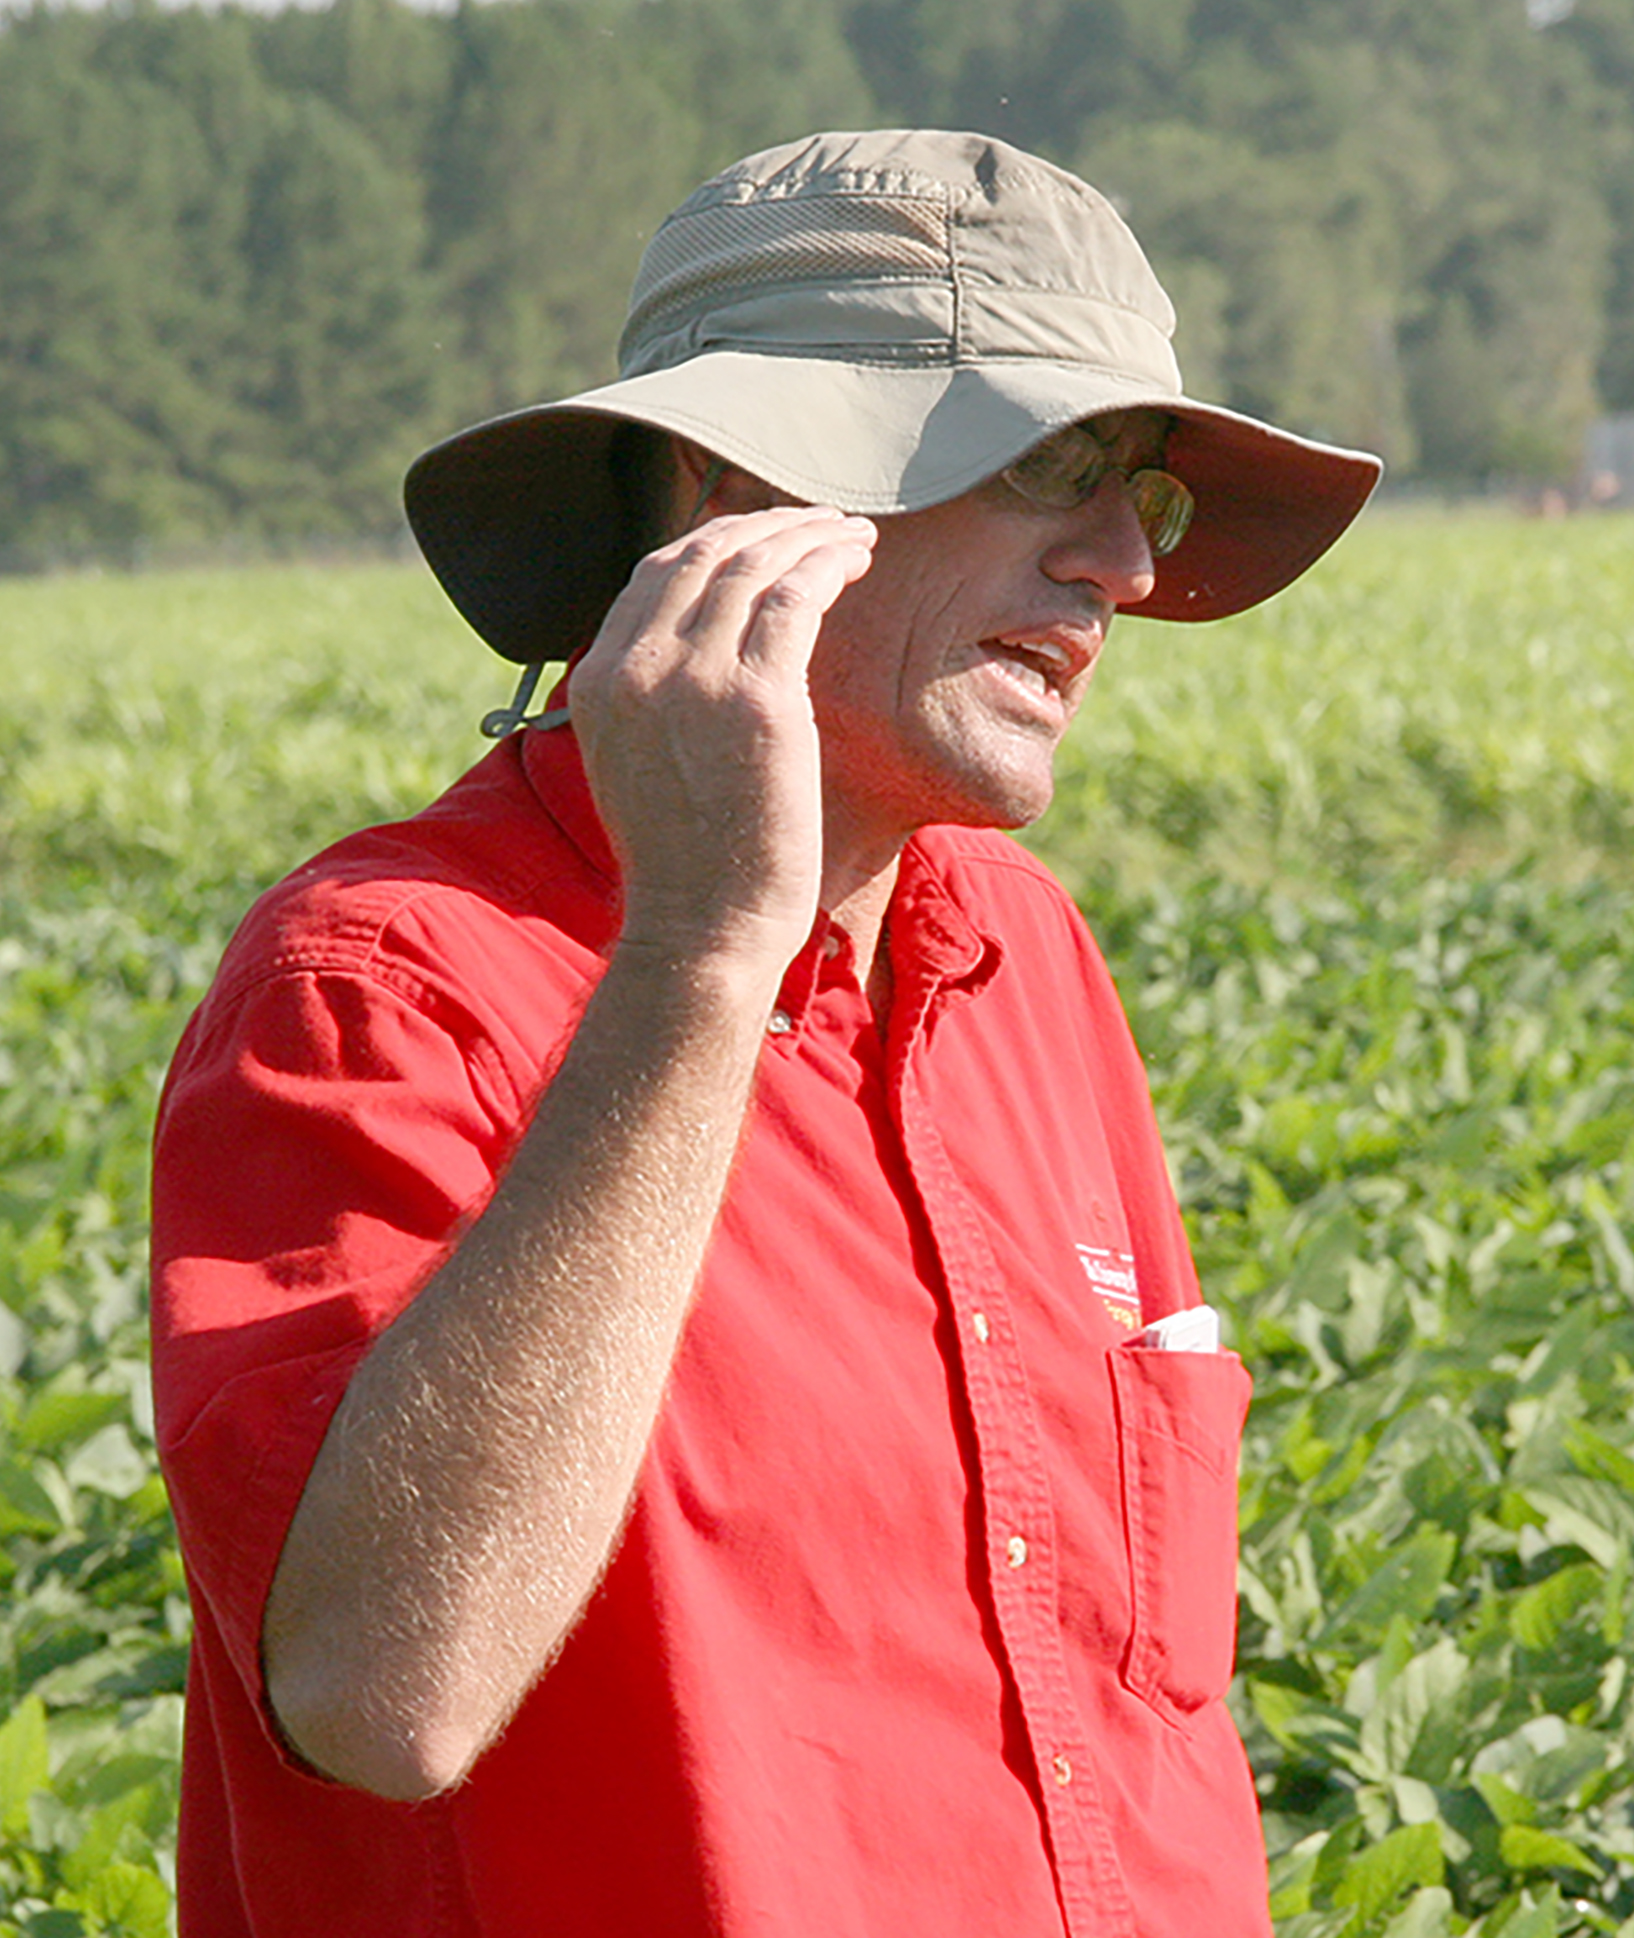 Colquitt County Extension ANR agent and county coordinator Jeremy Kichler speaks during Sunbelt Field Day in July, 2015.